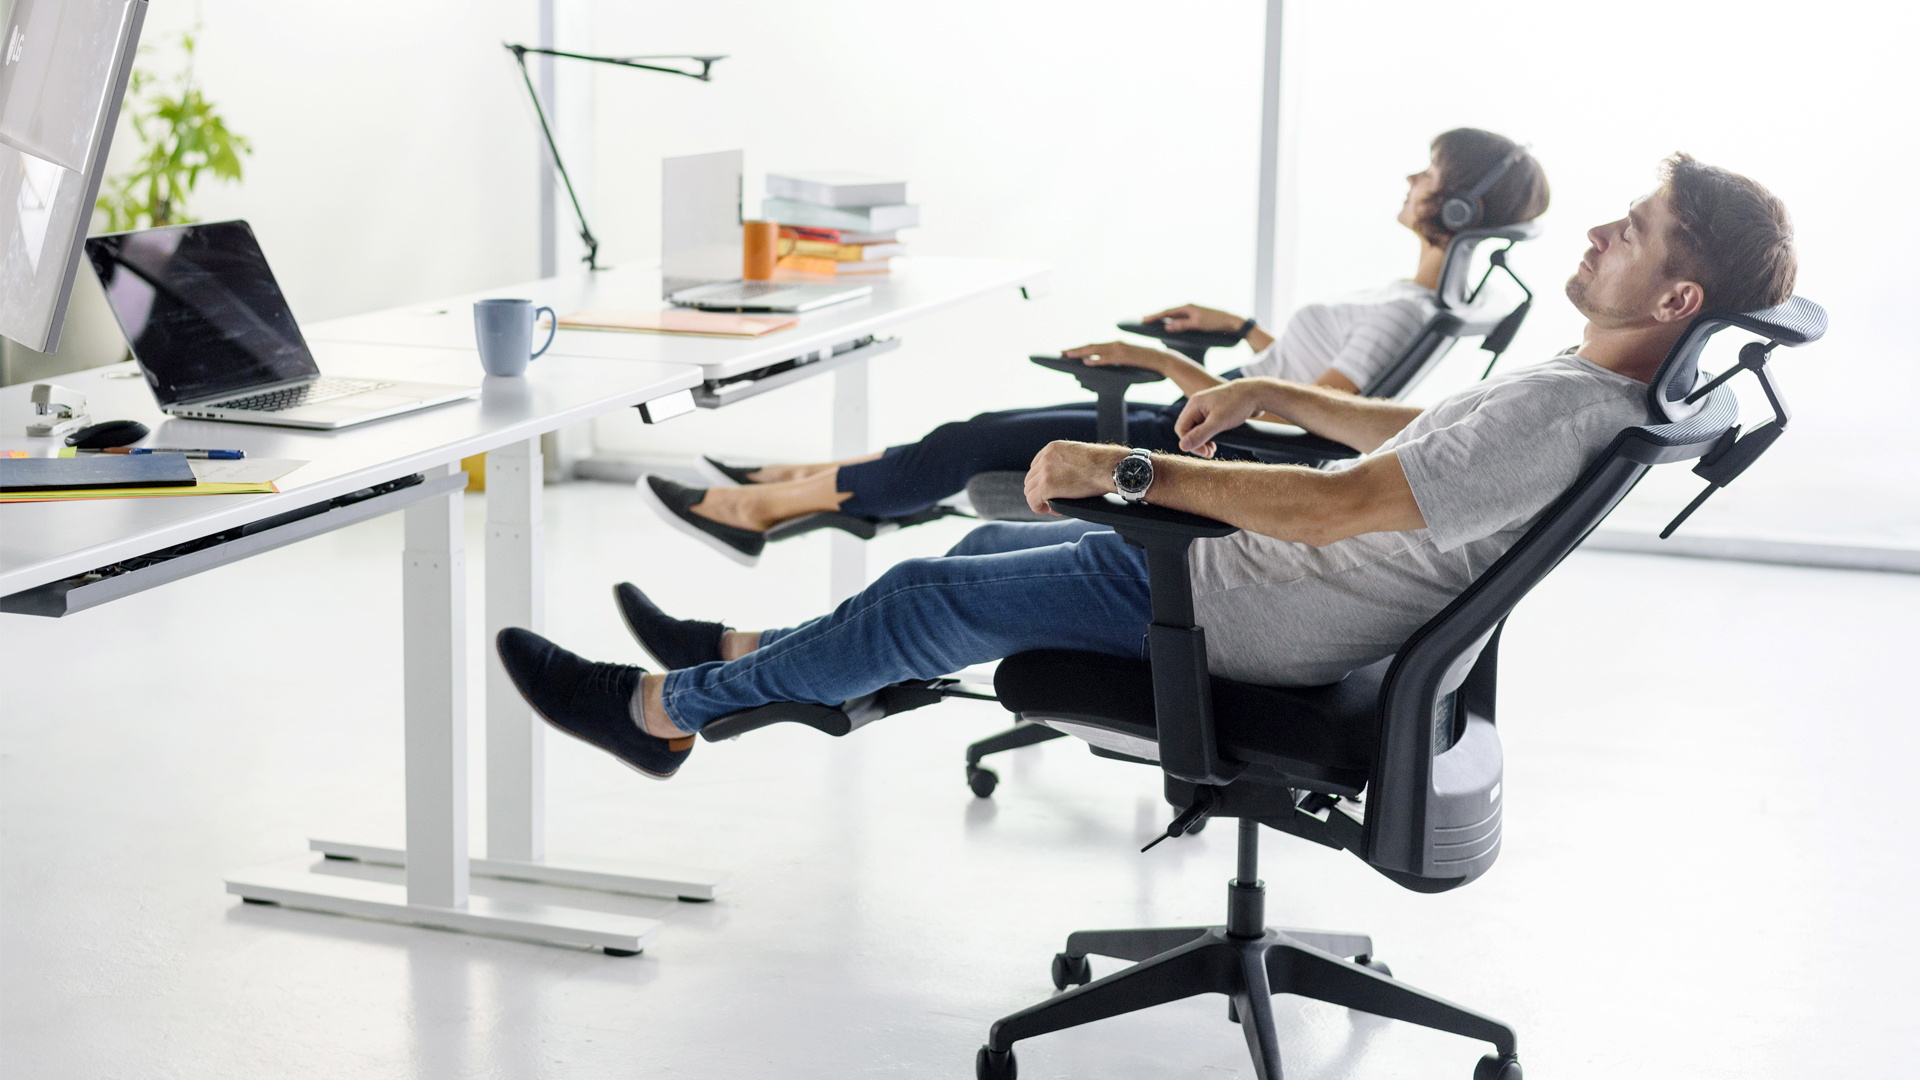 What Makes an Office Chair Comfortable?